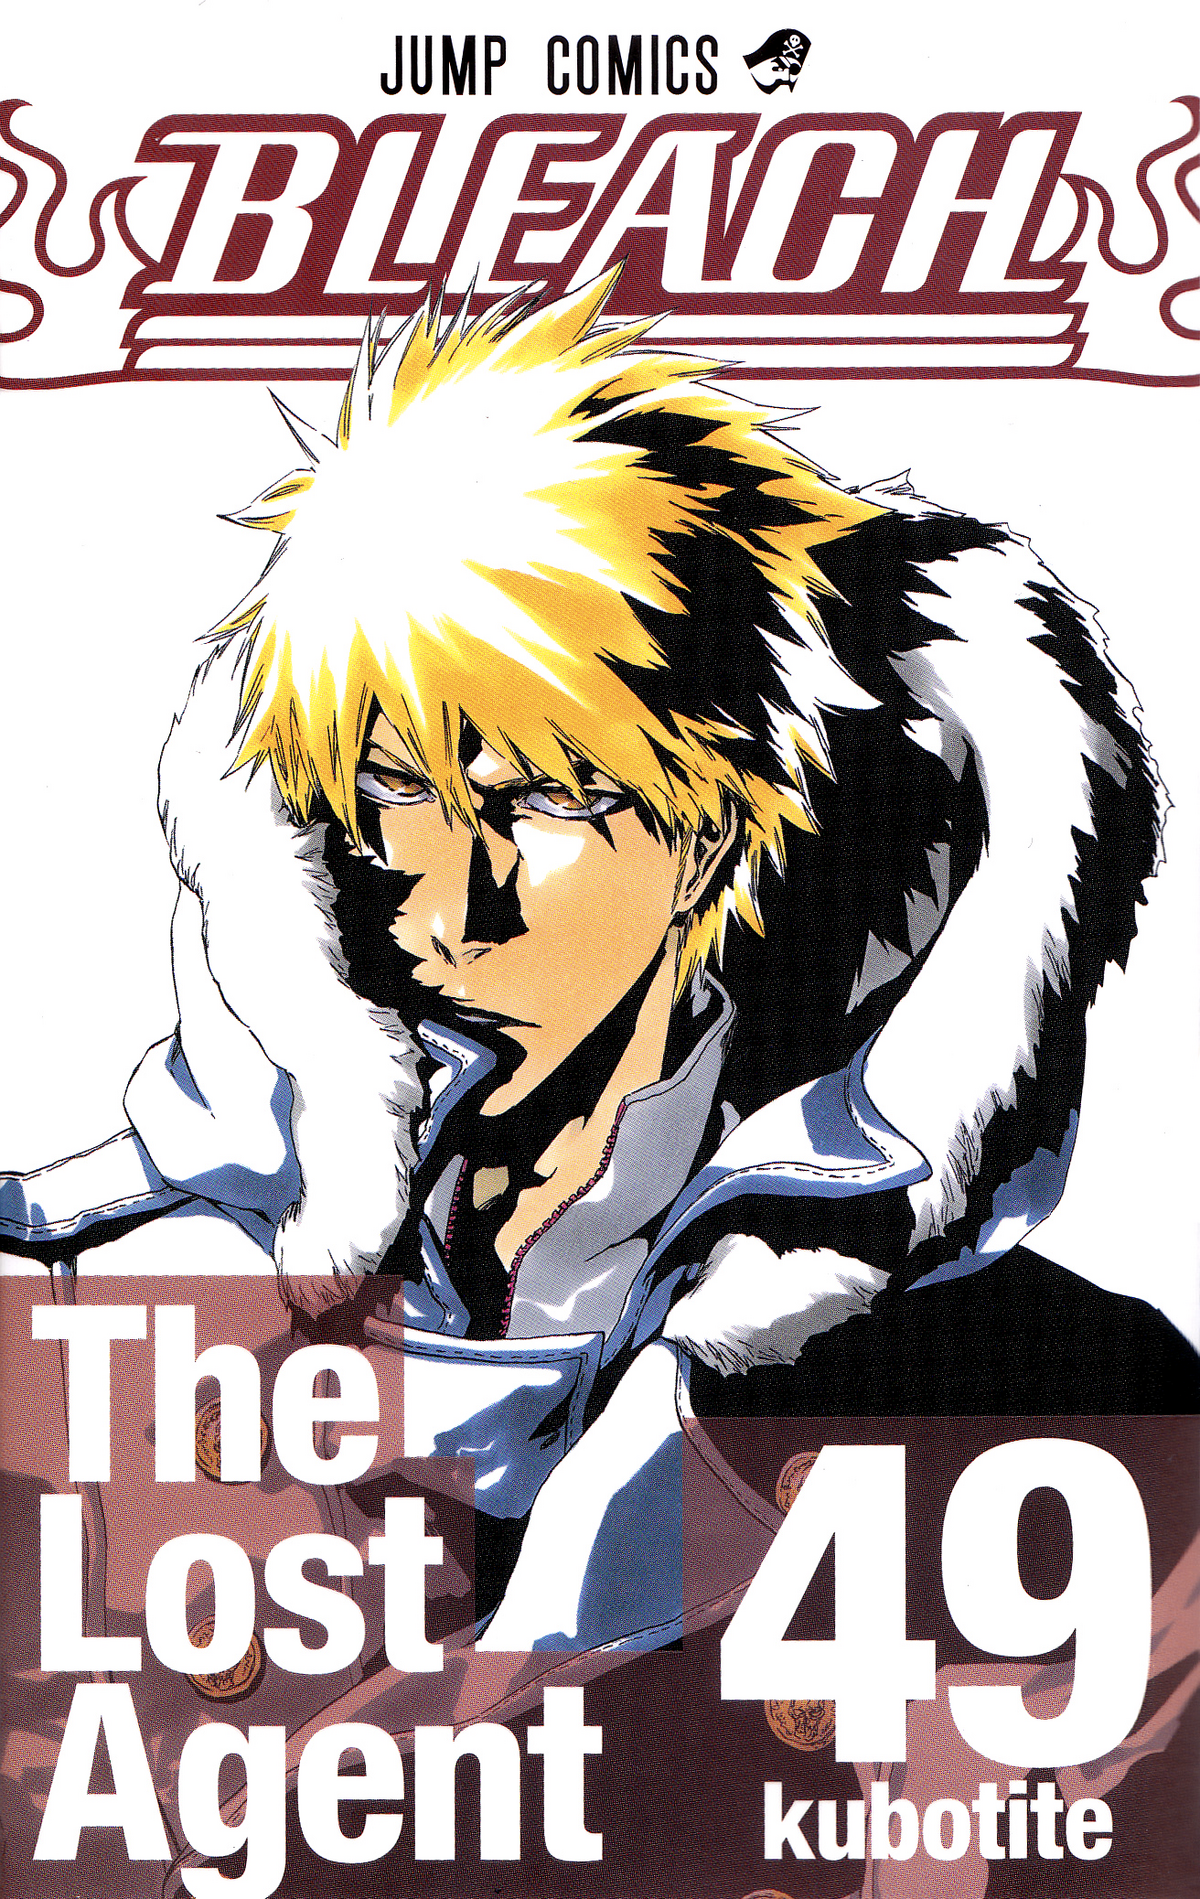 Bonganime - CONTEXT: The Lost Substitute Soul Reaper arc from the  anime/manga series BLEACH - also known as the Fullbringer arc - bears a  similarity with another shonen story arc, i.e, the